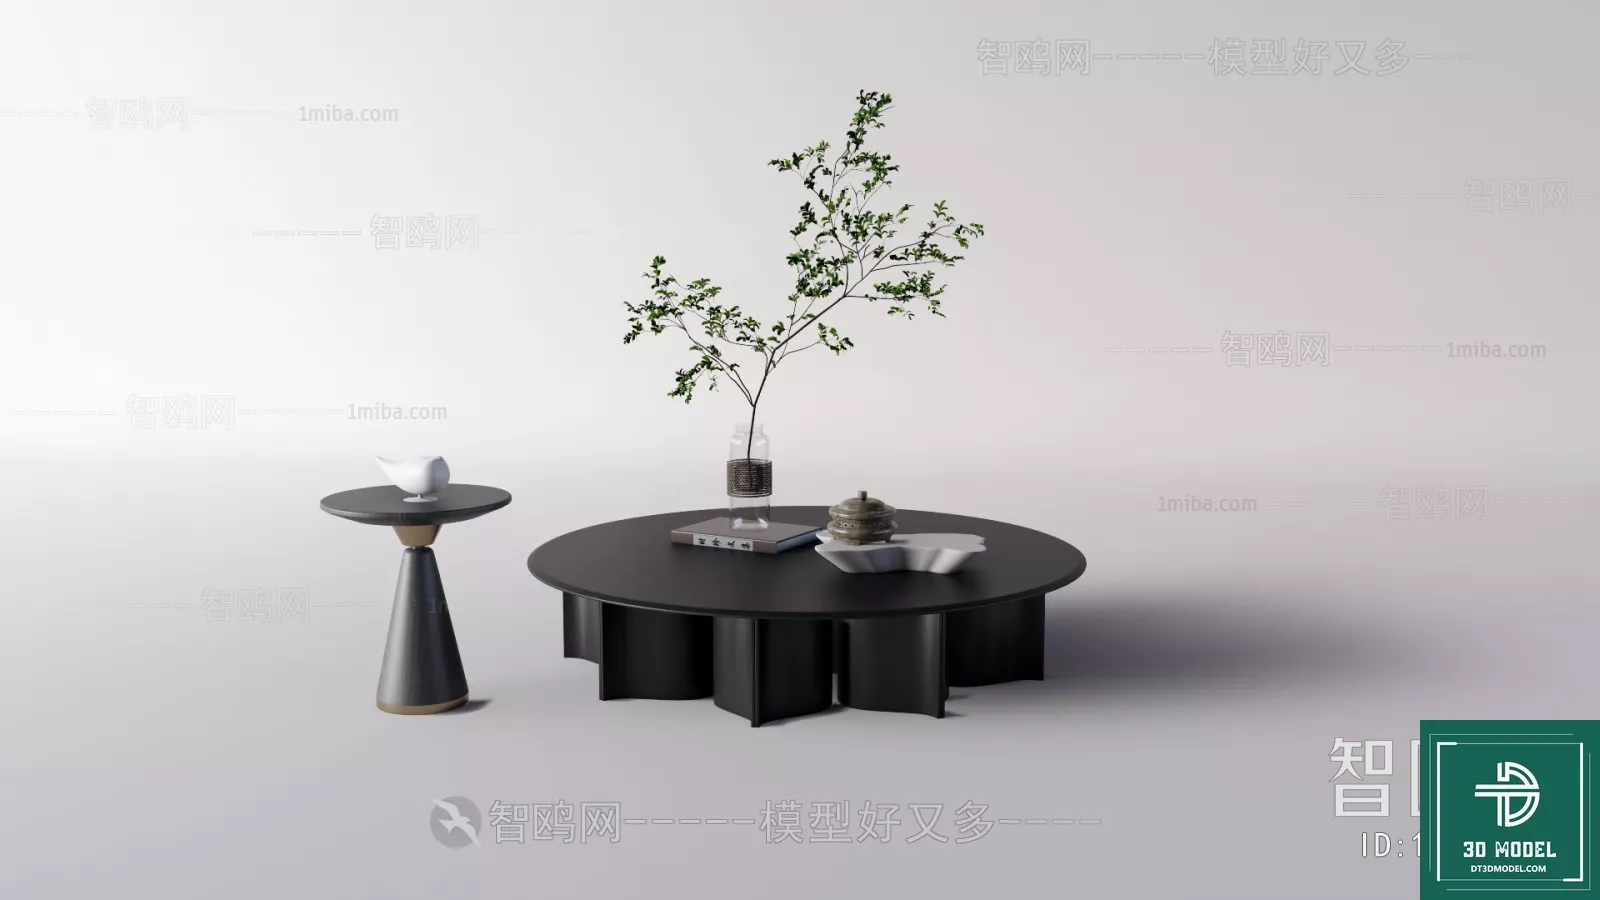 MODERN TEA TABLE - SKETCHUP 3D MODEL - VRAY OR ENSCAPE - ID14957